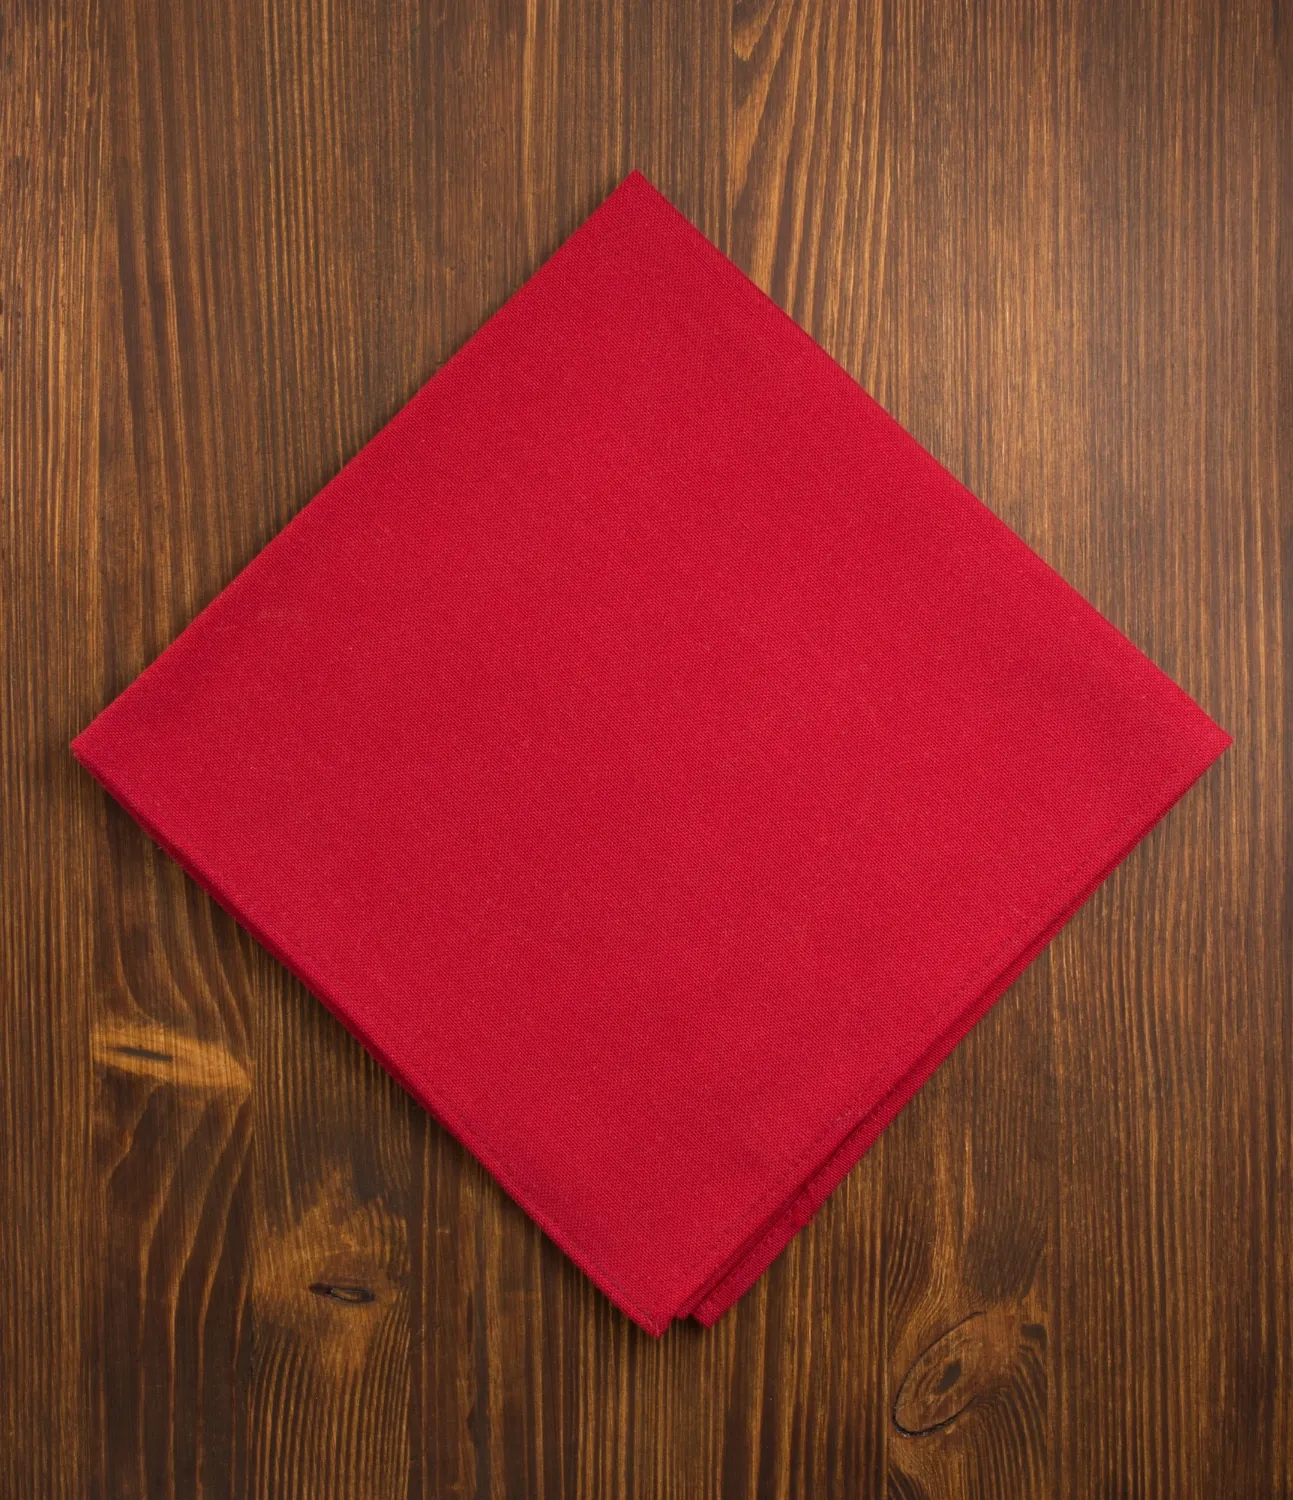 Cloth napkin with wooden background customnapkins